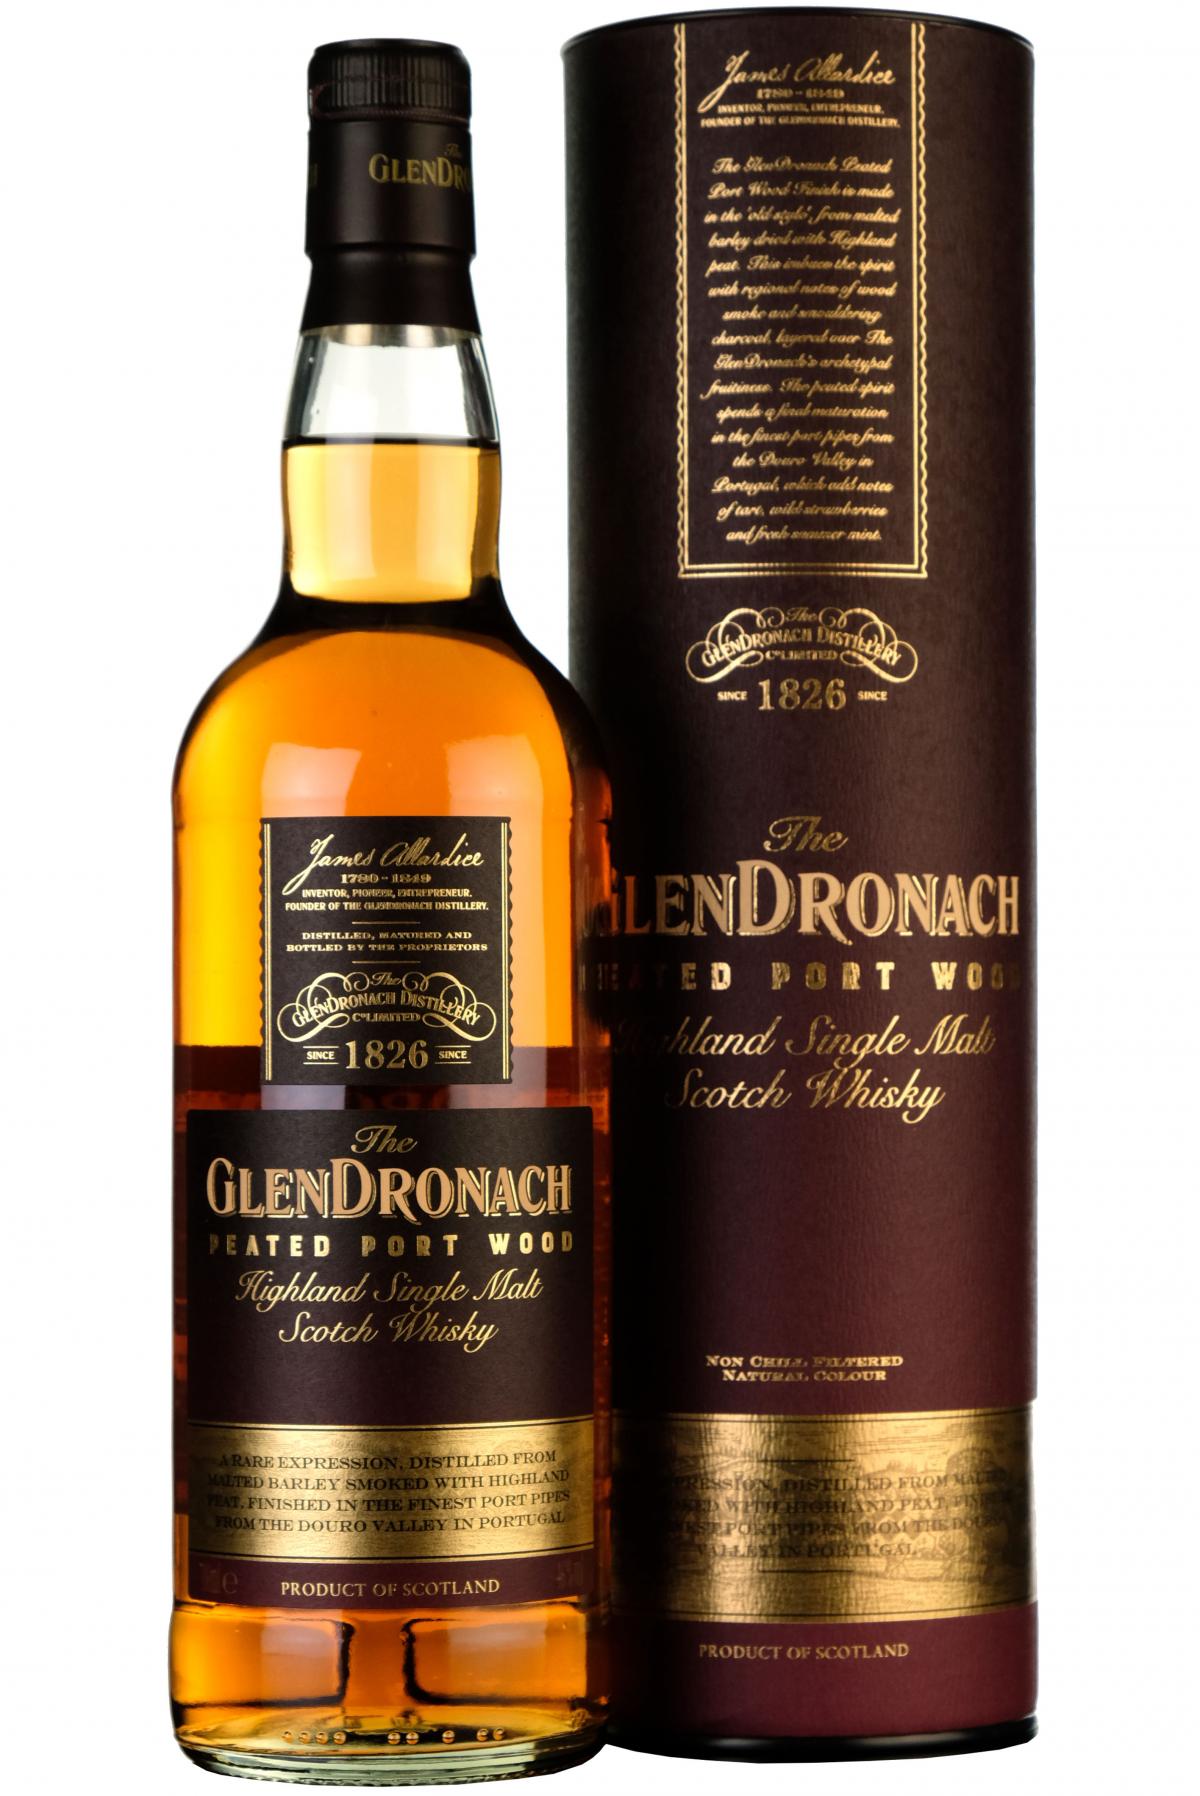 glendronach finished in peated port wood